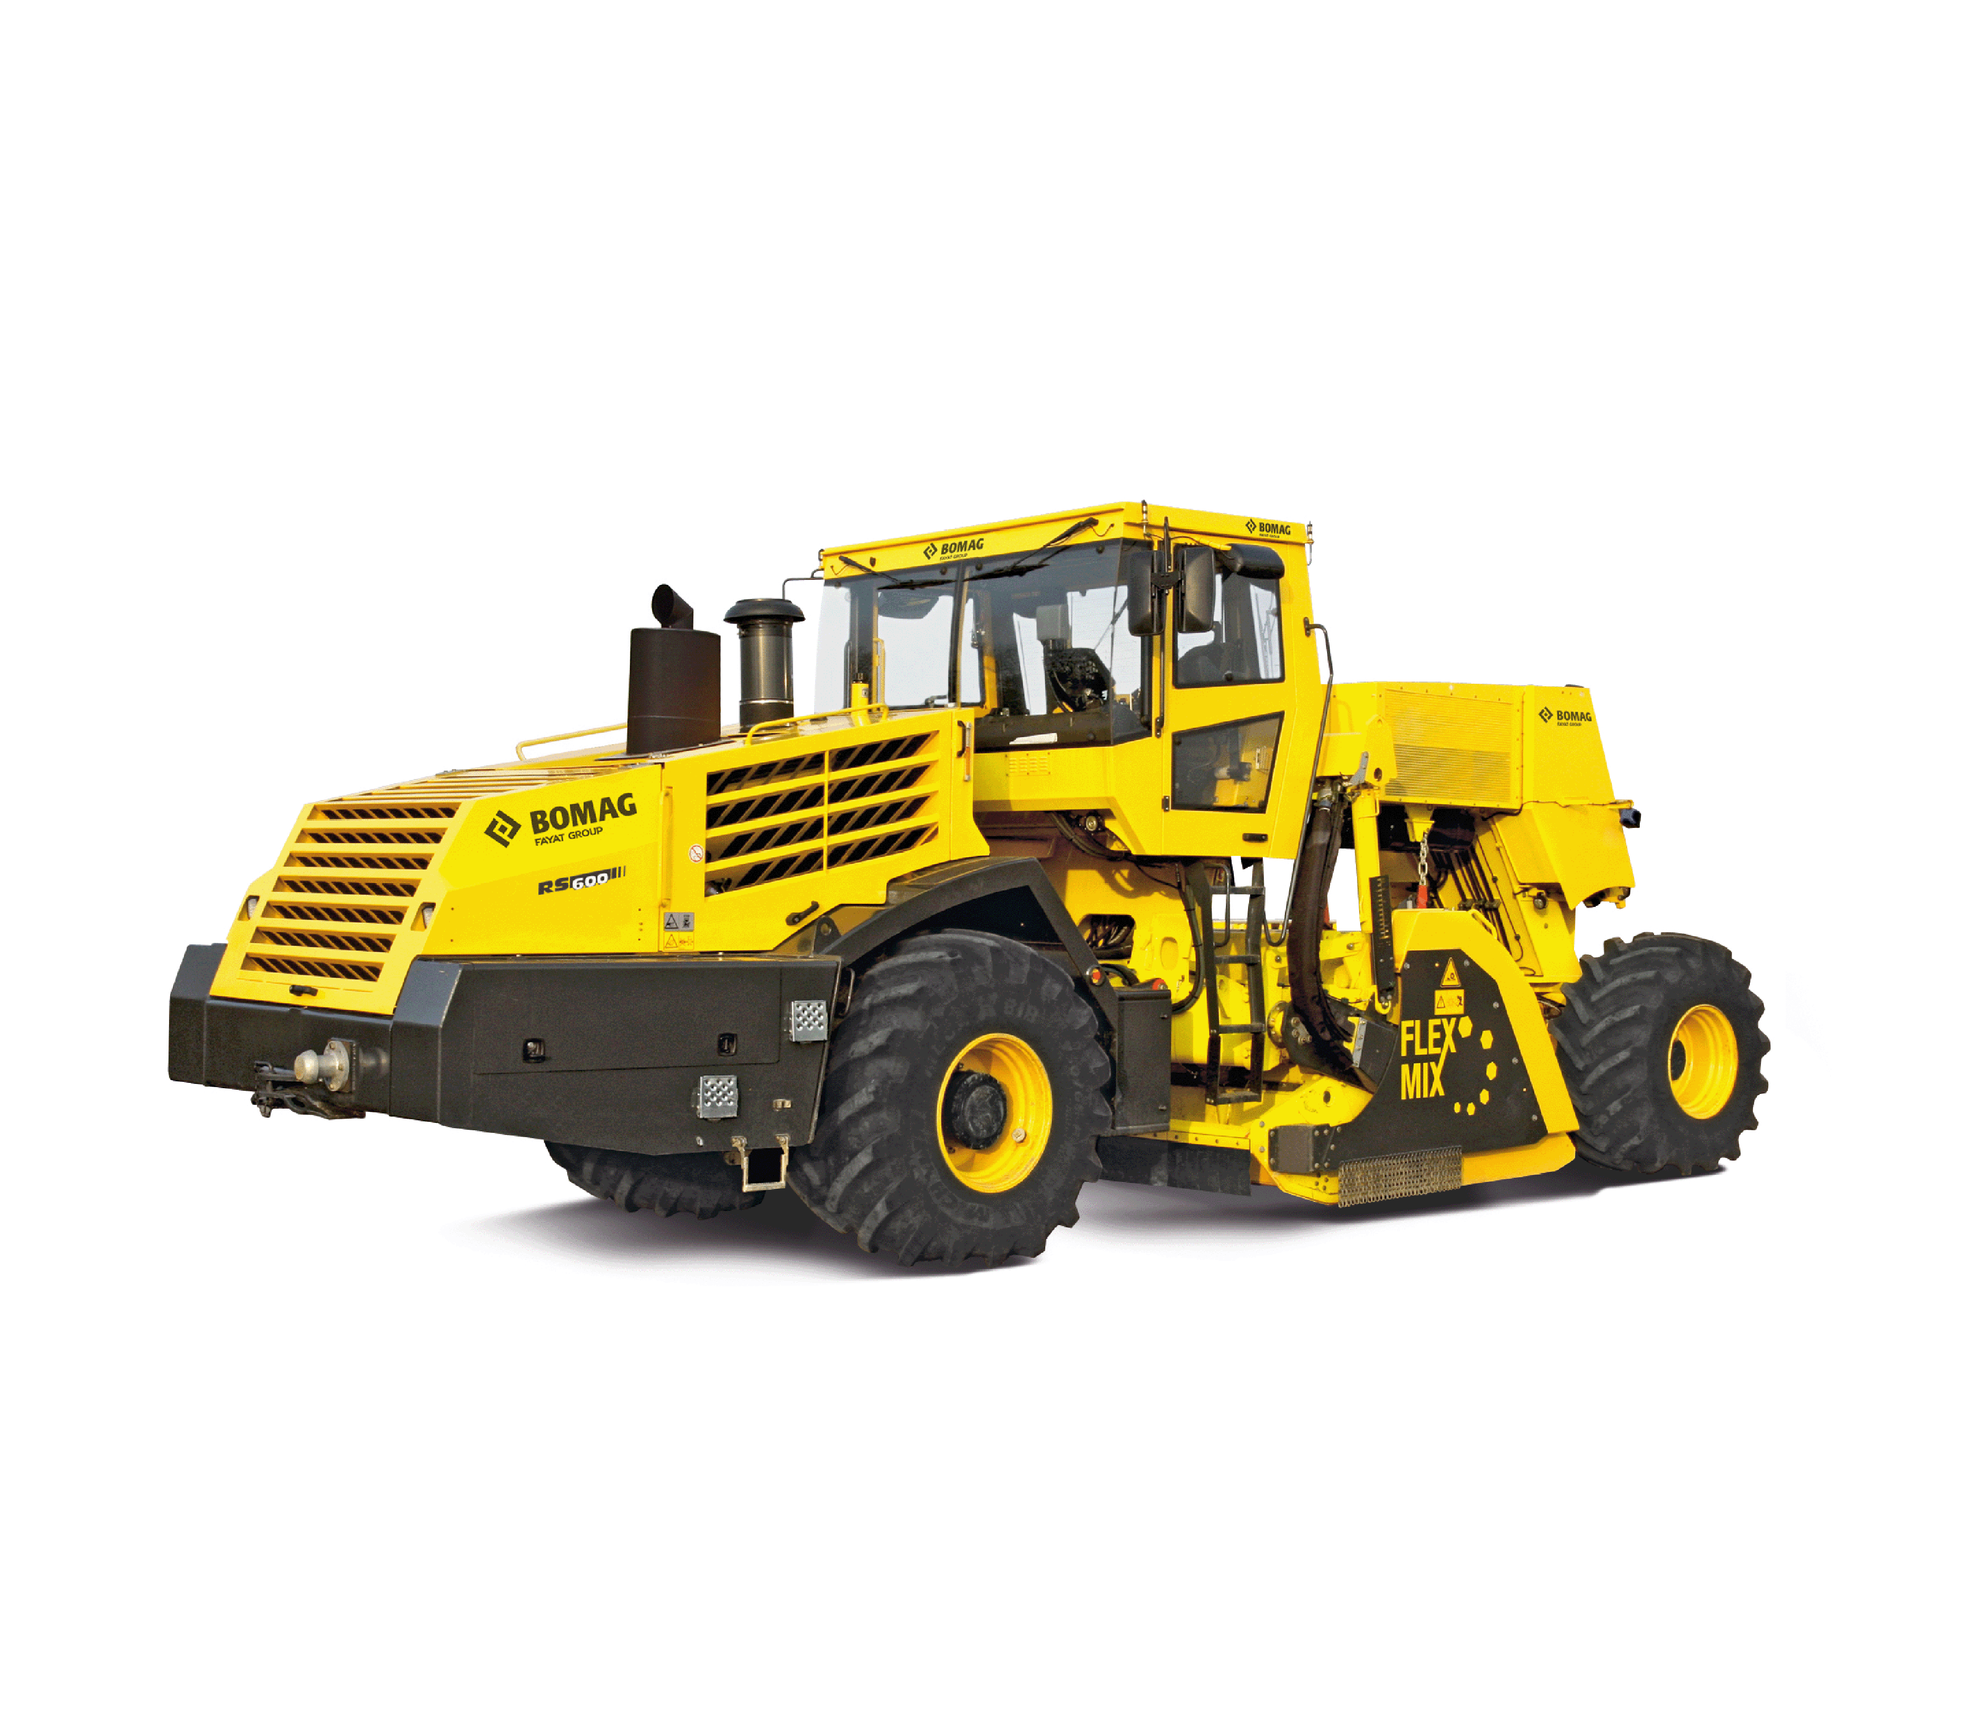 BOMAG RS 600